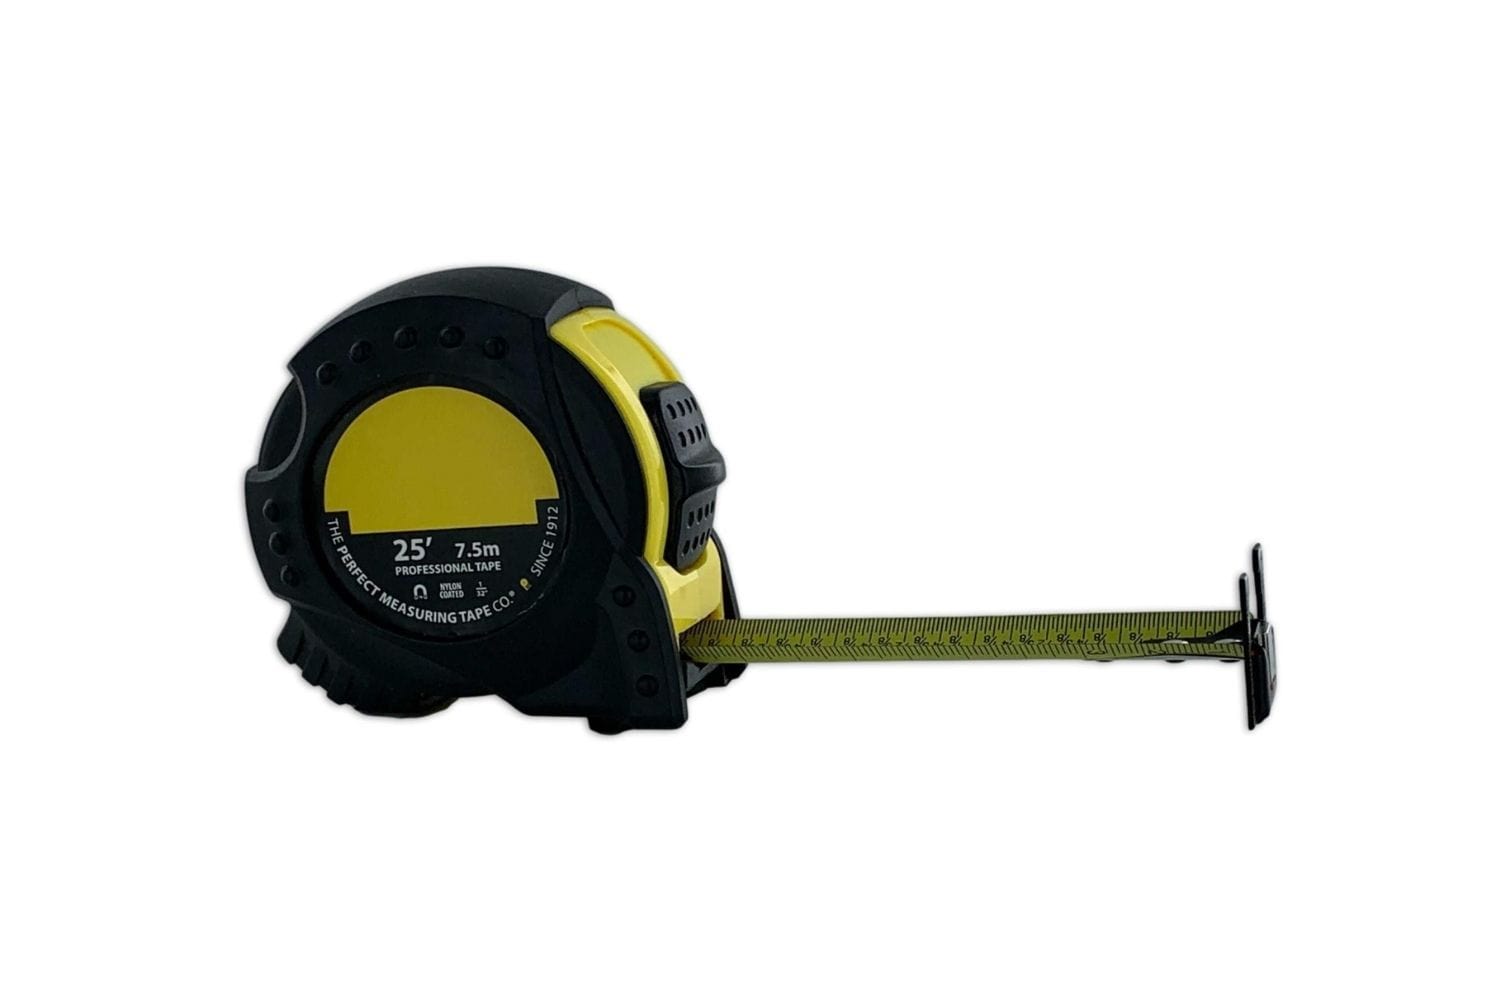 HAUTMEC Measuring Tape 25Ft-Double Side Metric and Inches Black Tape, –  Hautmectools